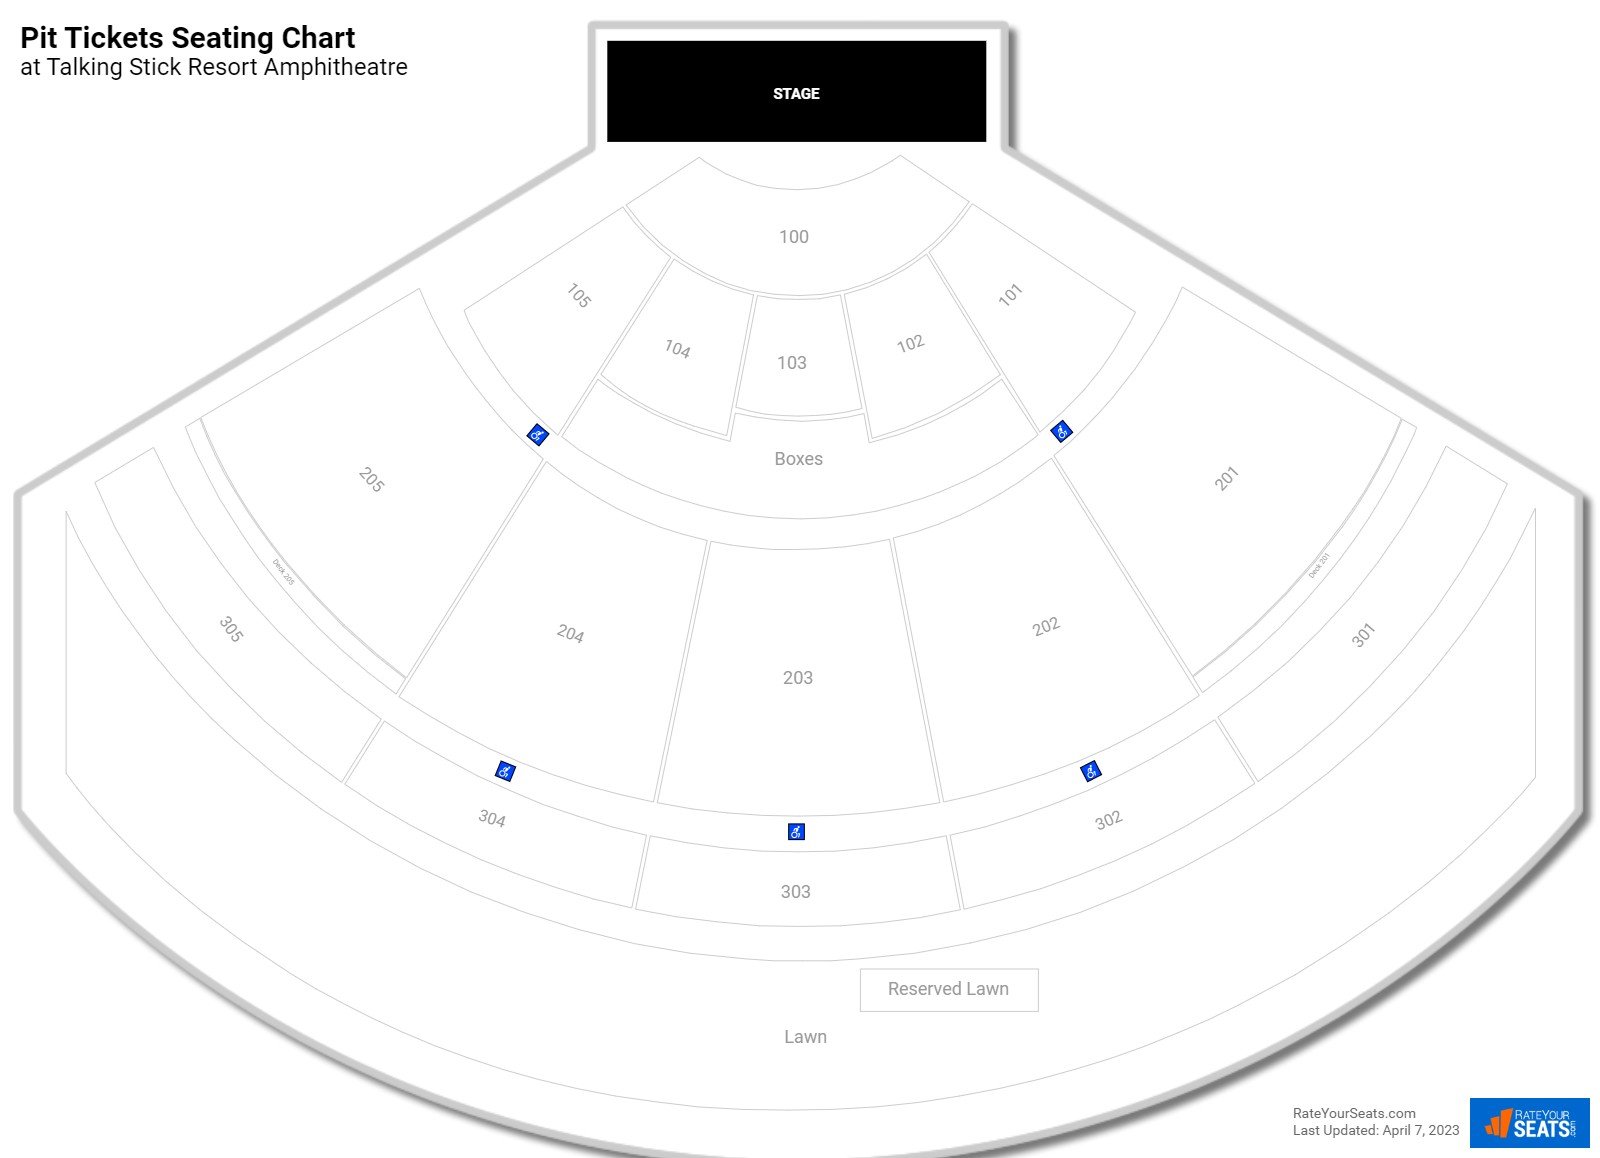 Concert Pit Tickets Seating Chart at Talking Stick Resort Amphitheatre